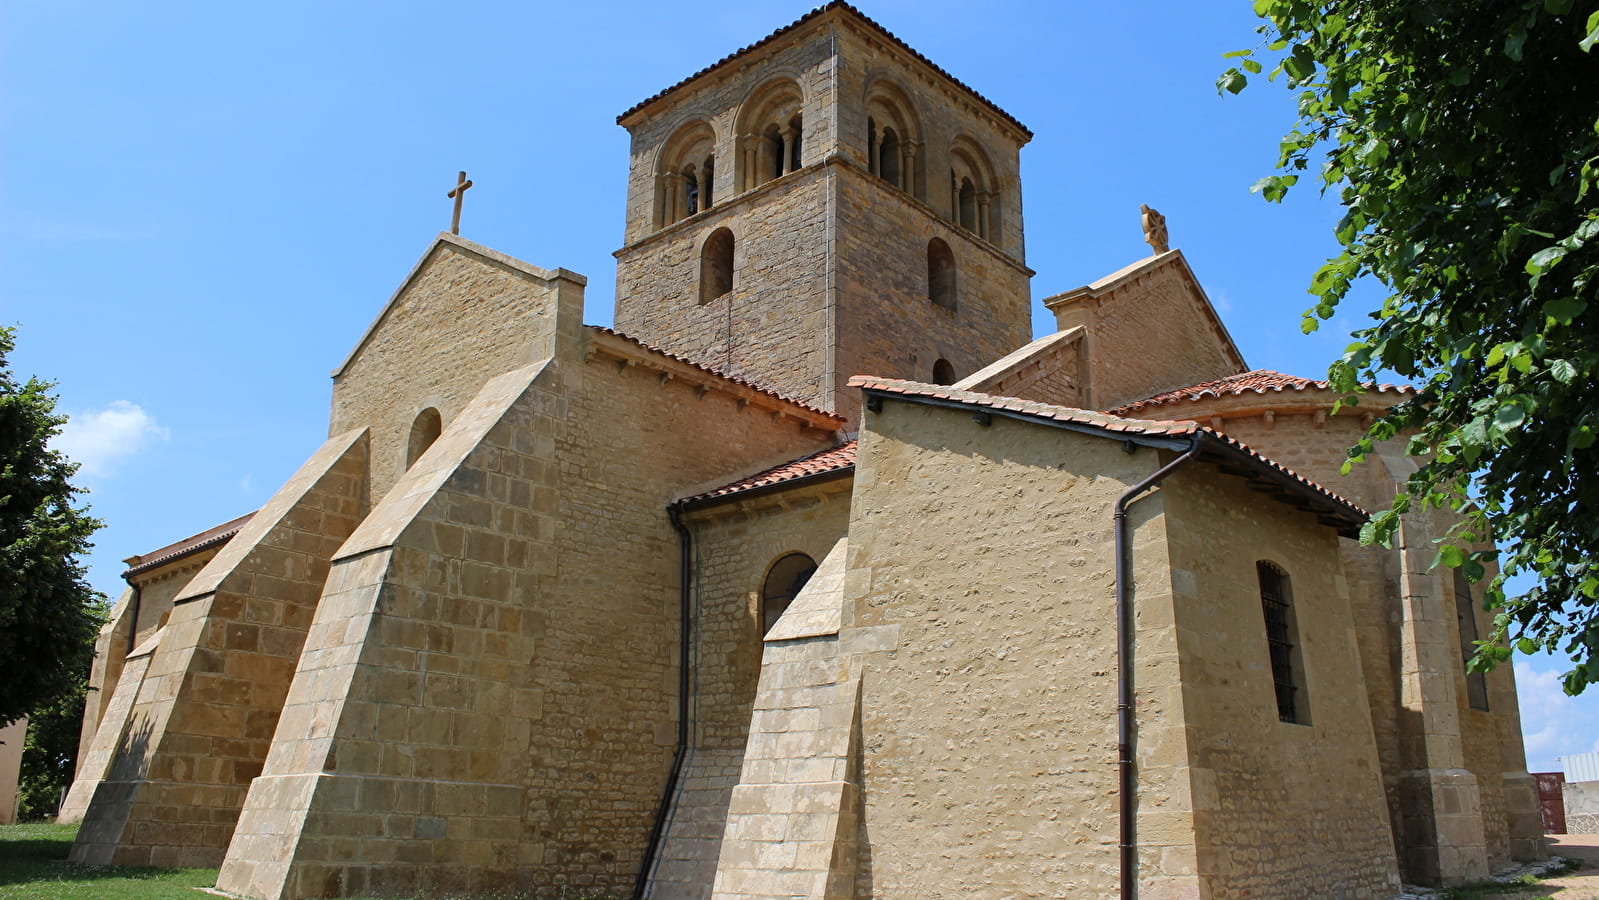 Guided tour of the Romanesque church, a Cluniac site